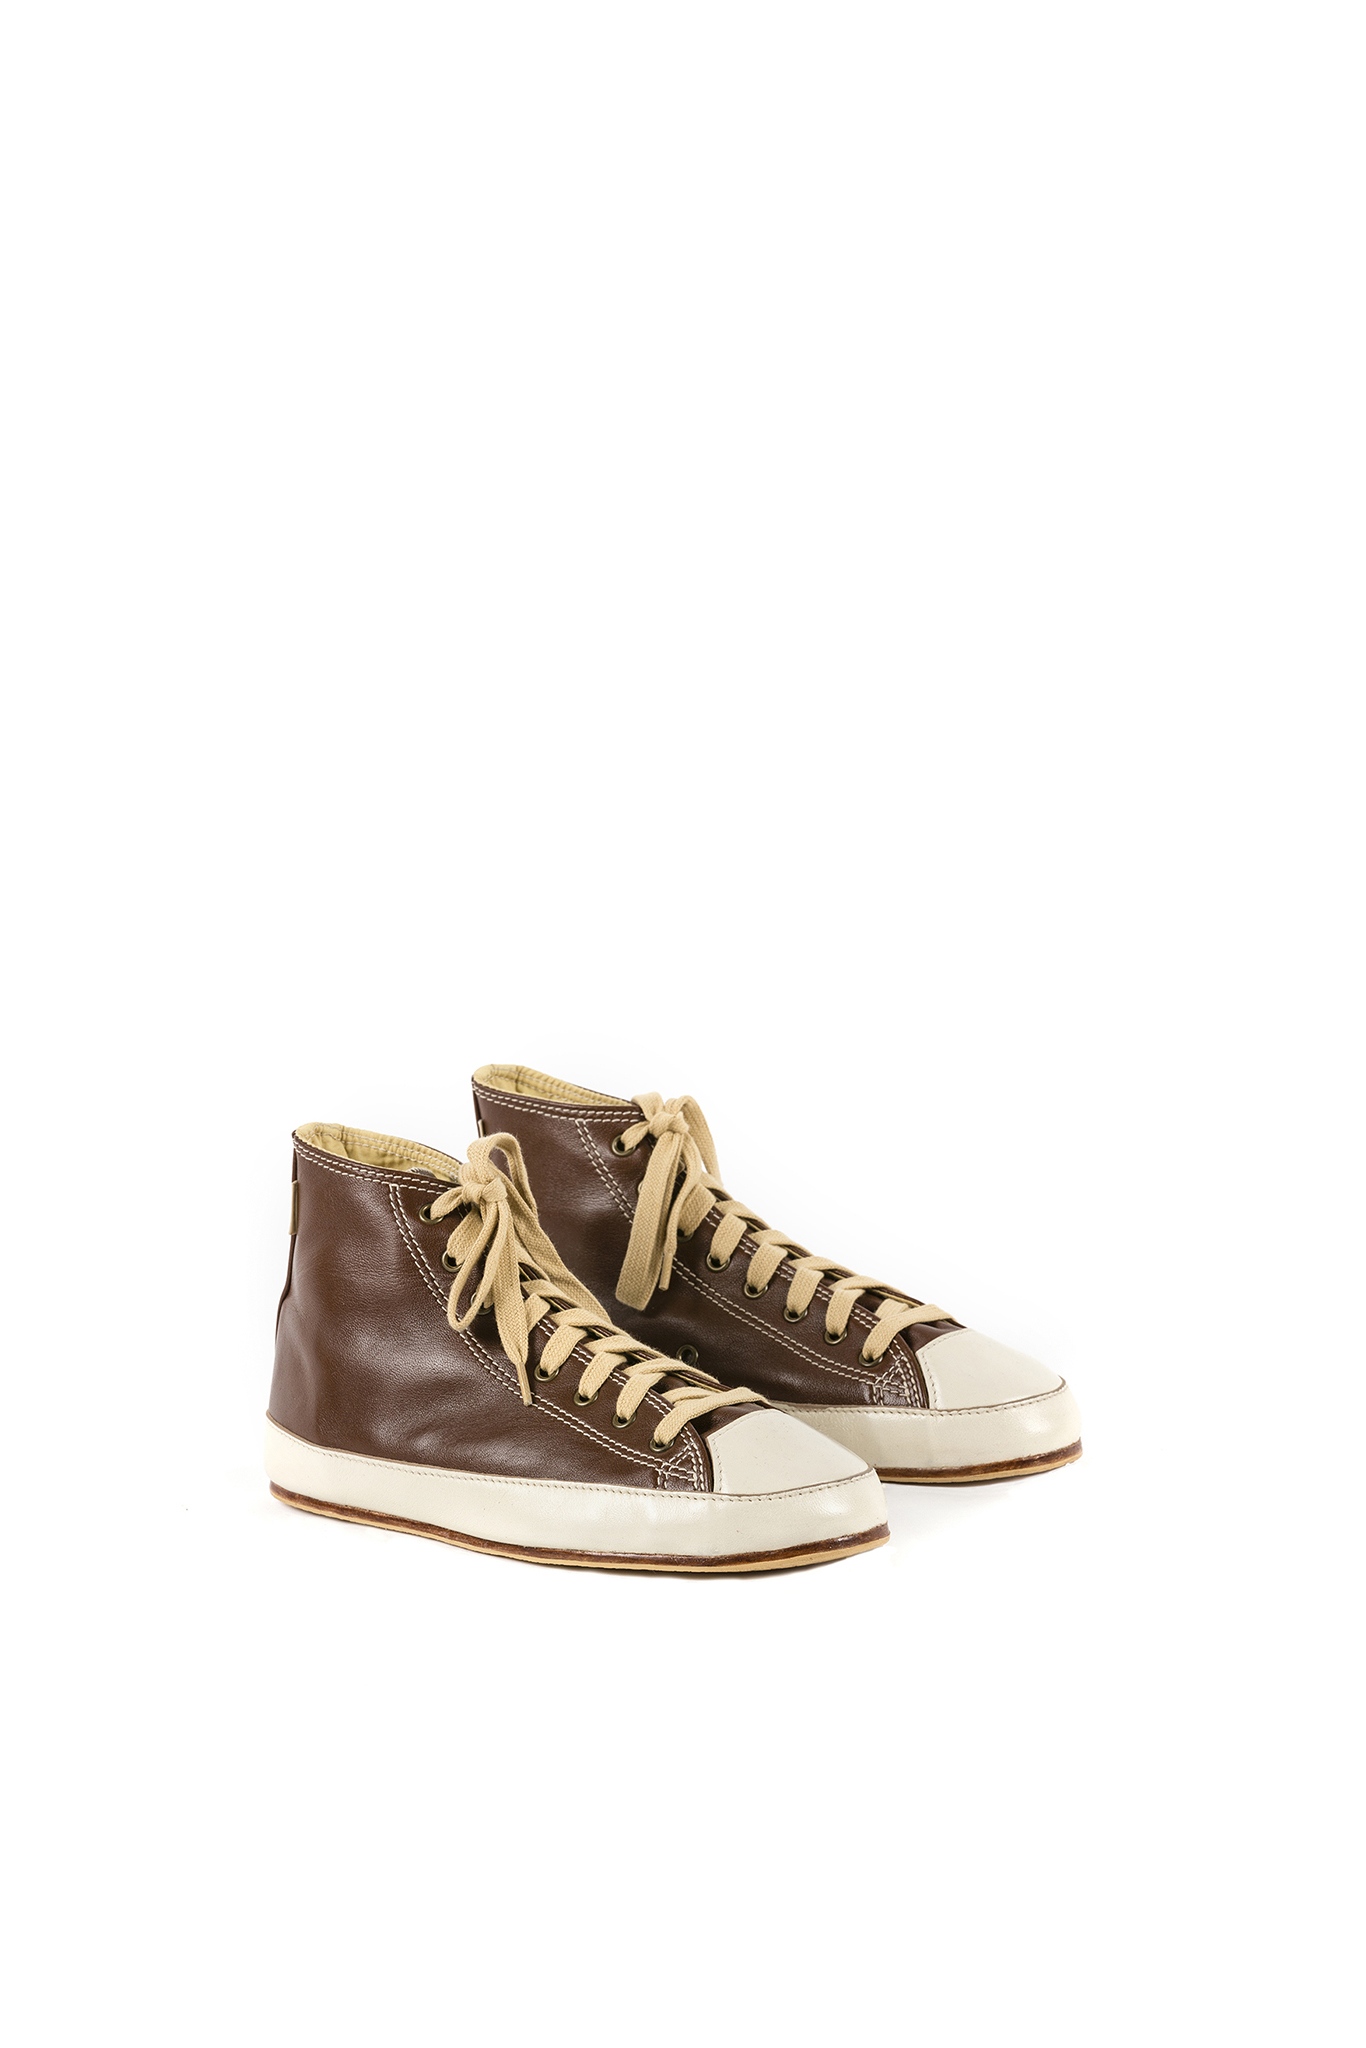 High Sneakers - Glossy leather - Brown color